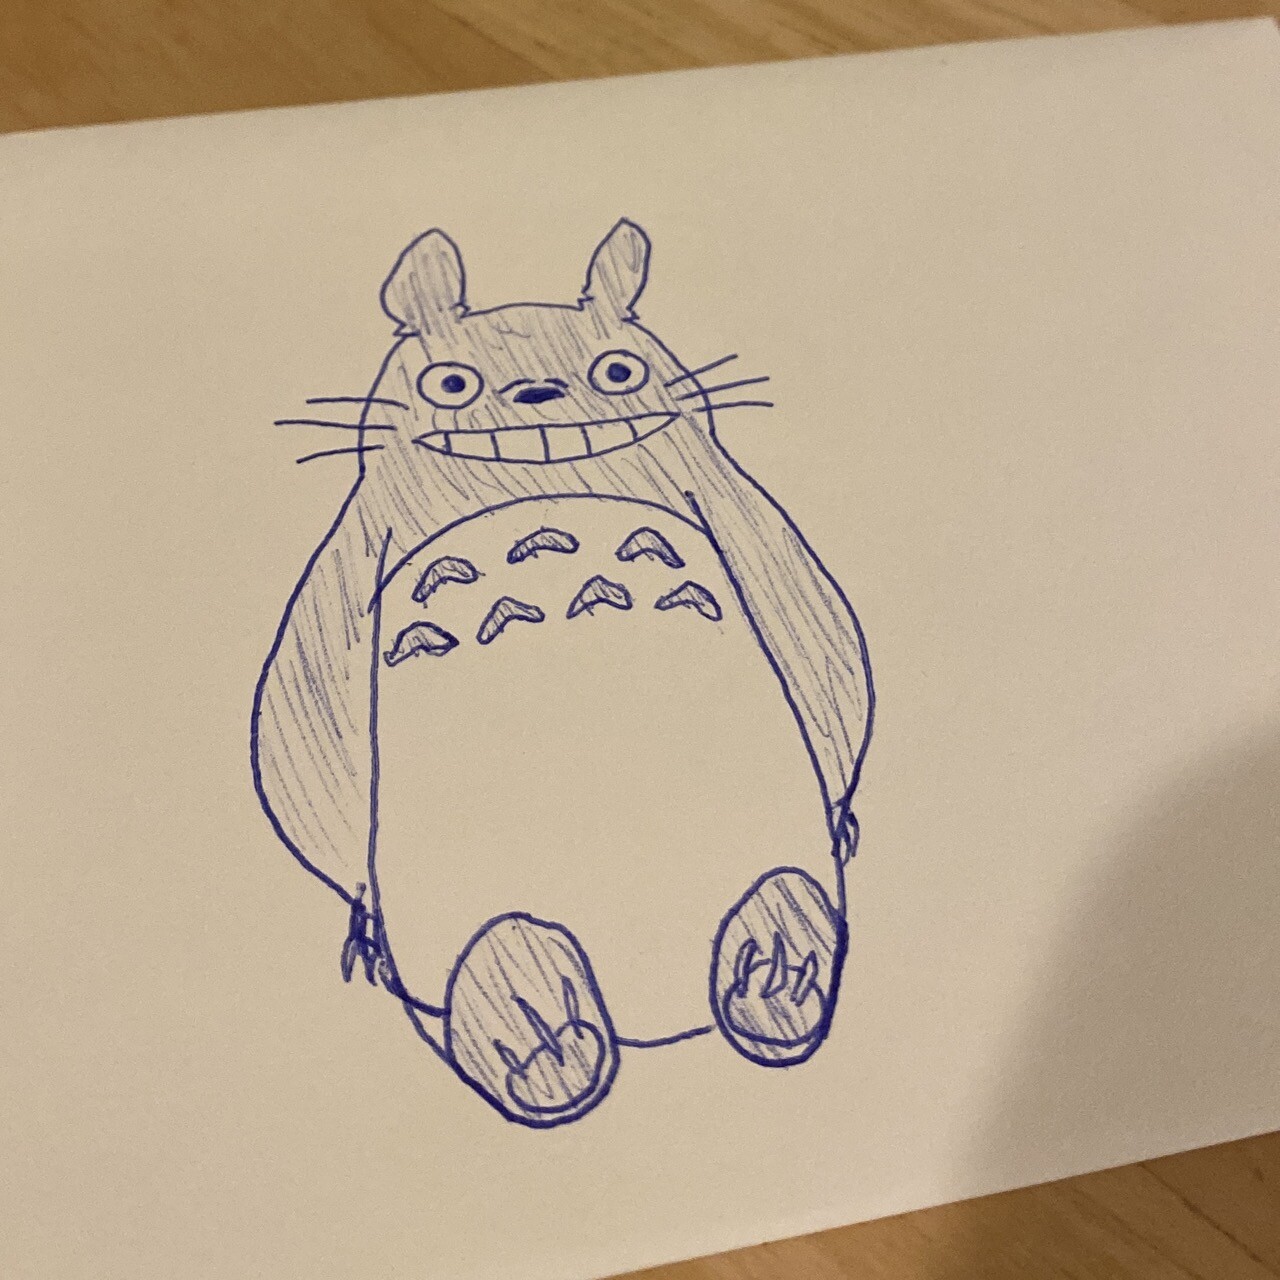 A drawing of Totoro from My Neighbor Totoro by Ghibli Studios